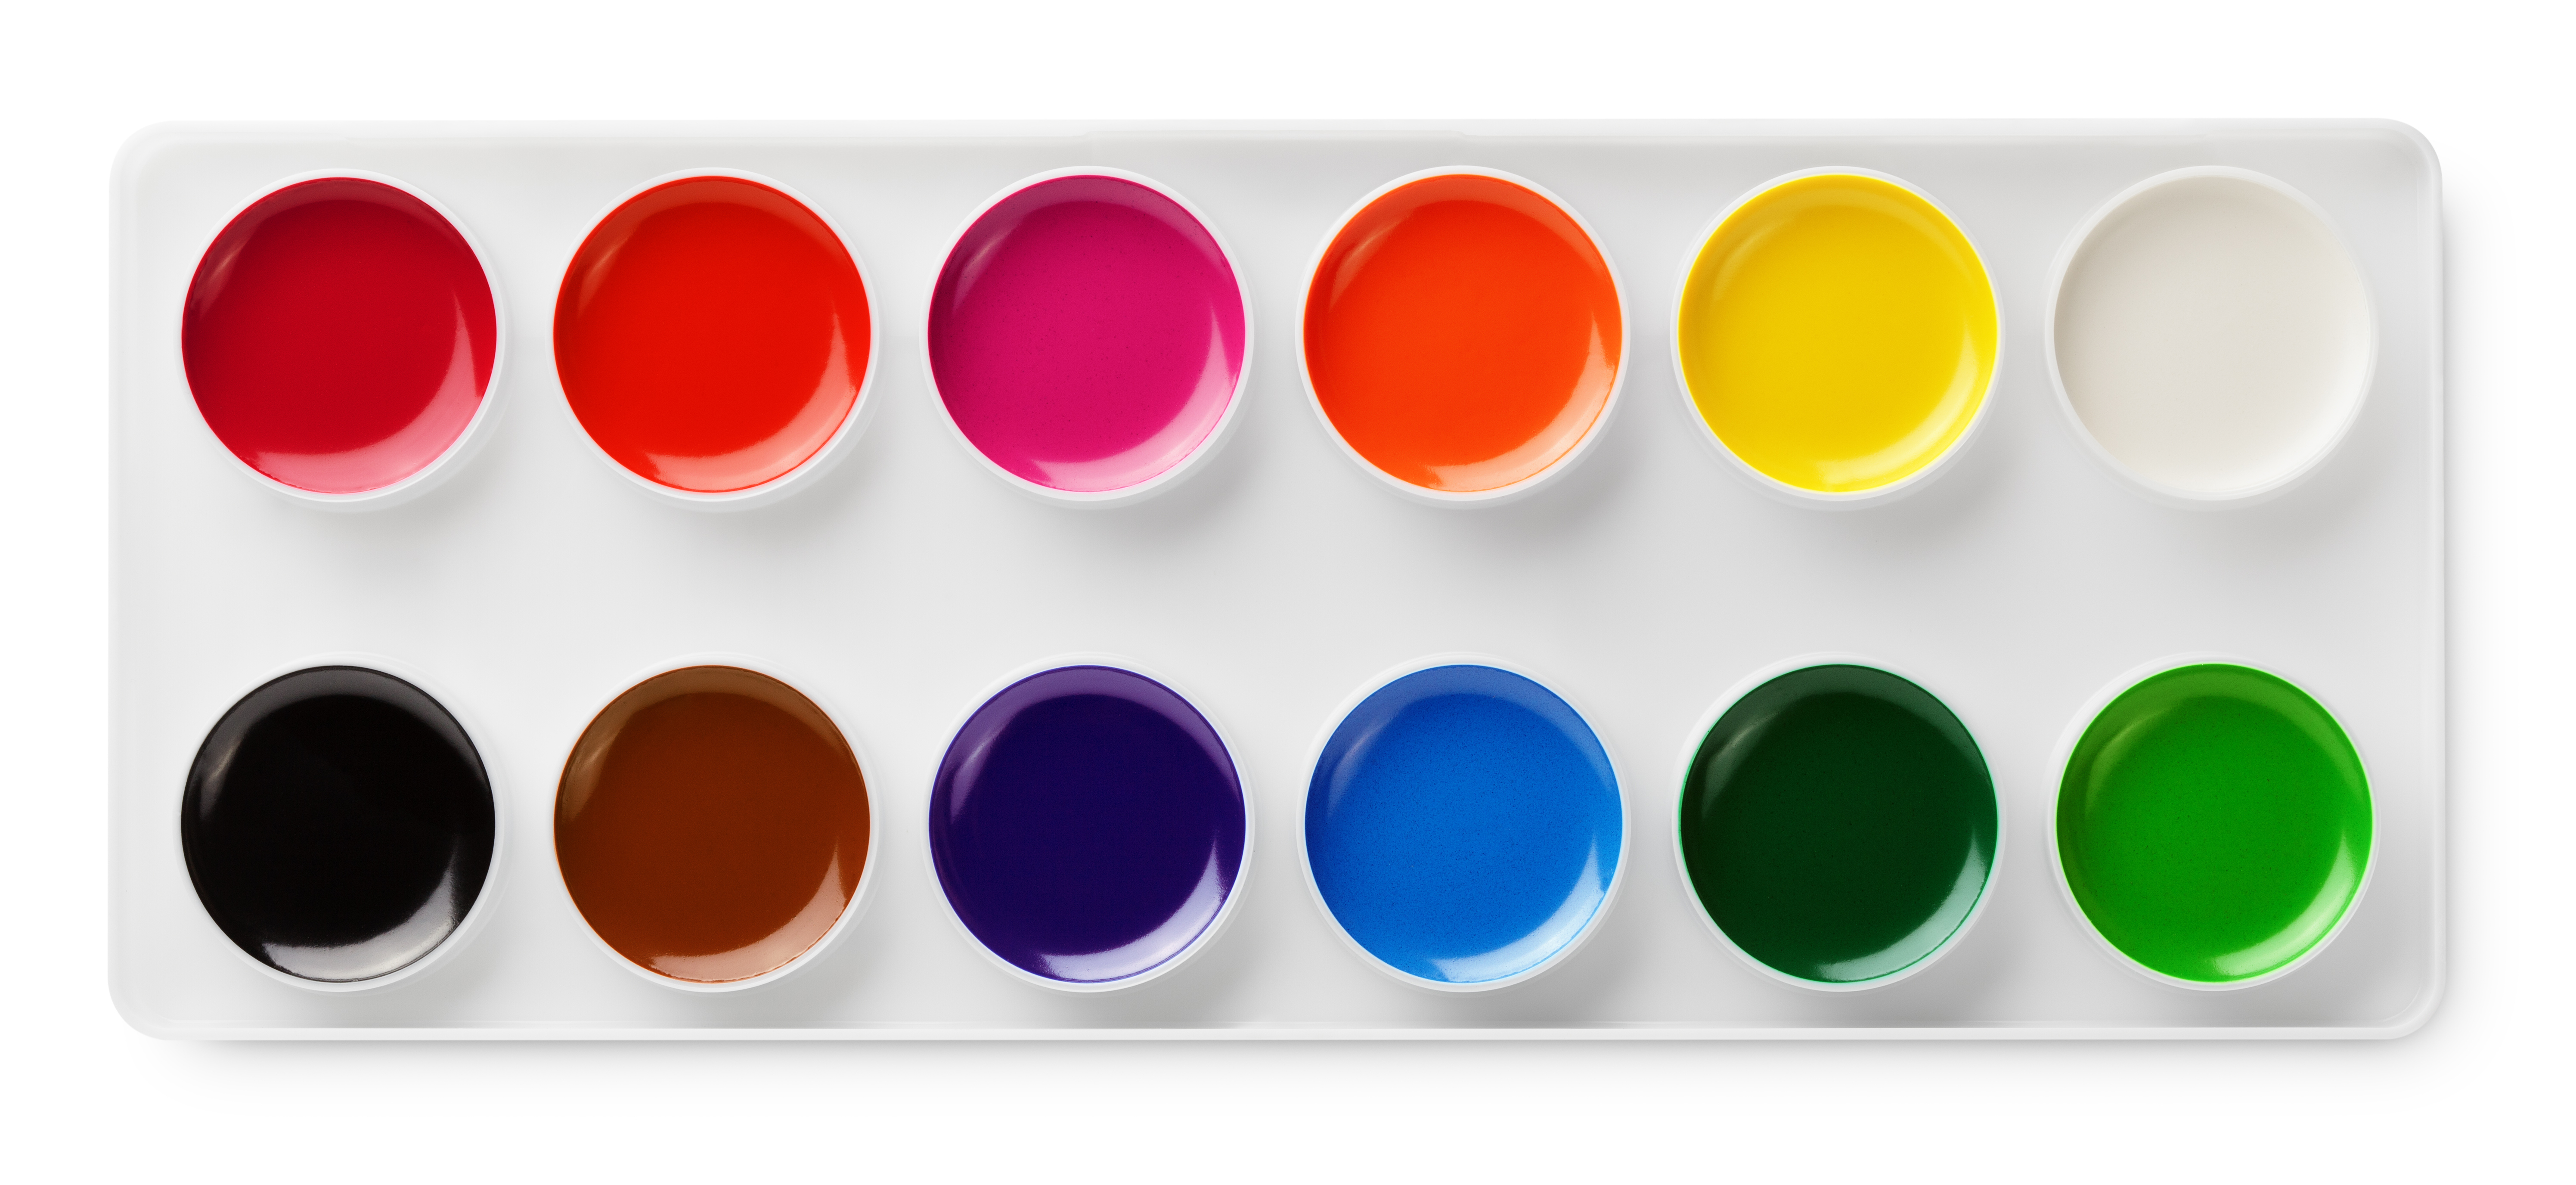 watercolor paints in box isolated on white